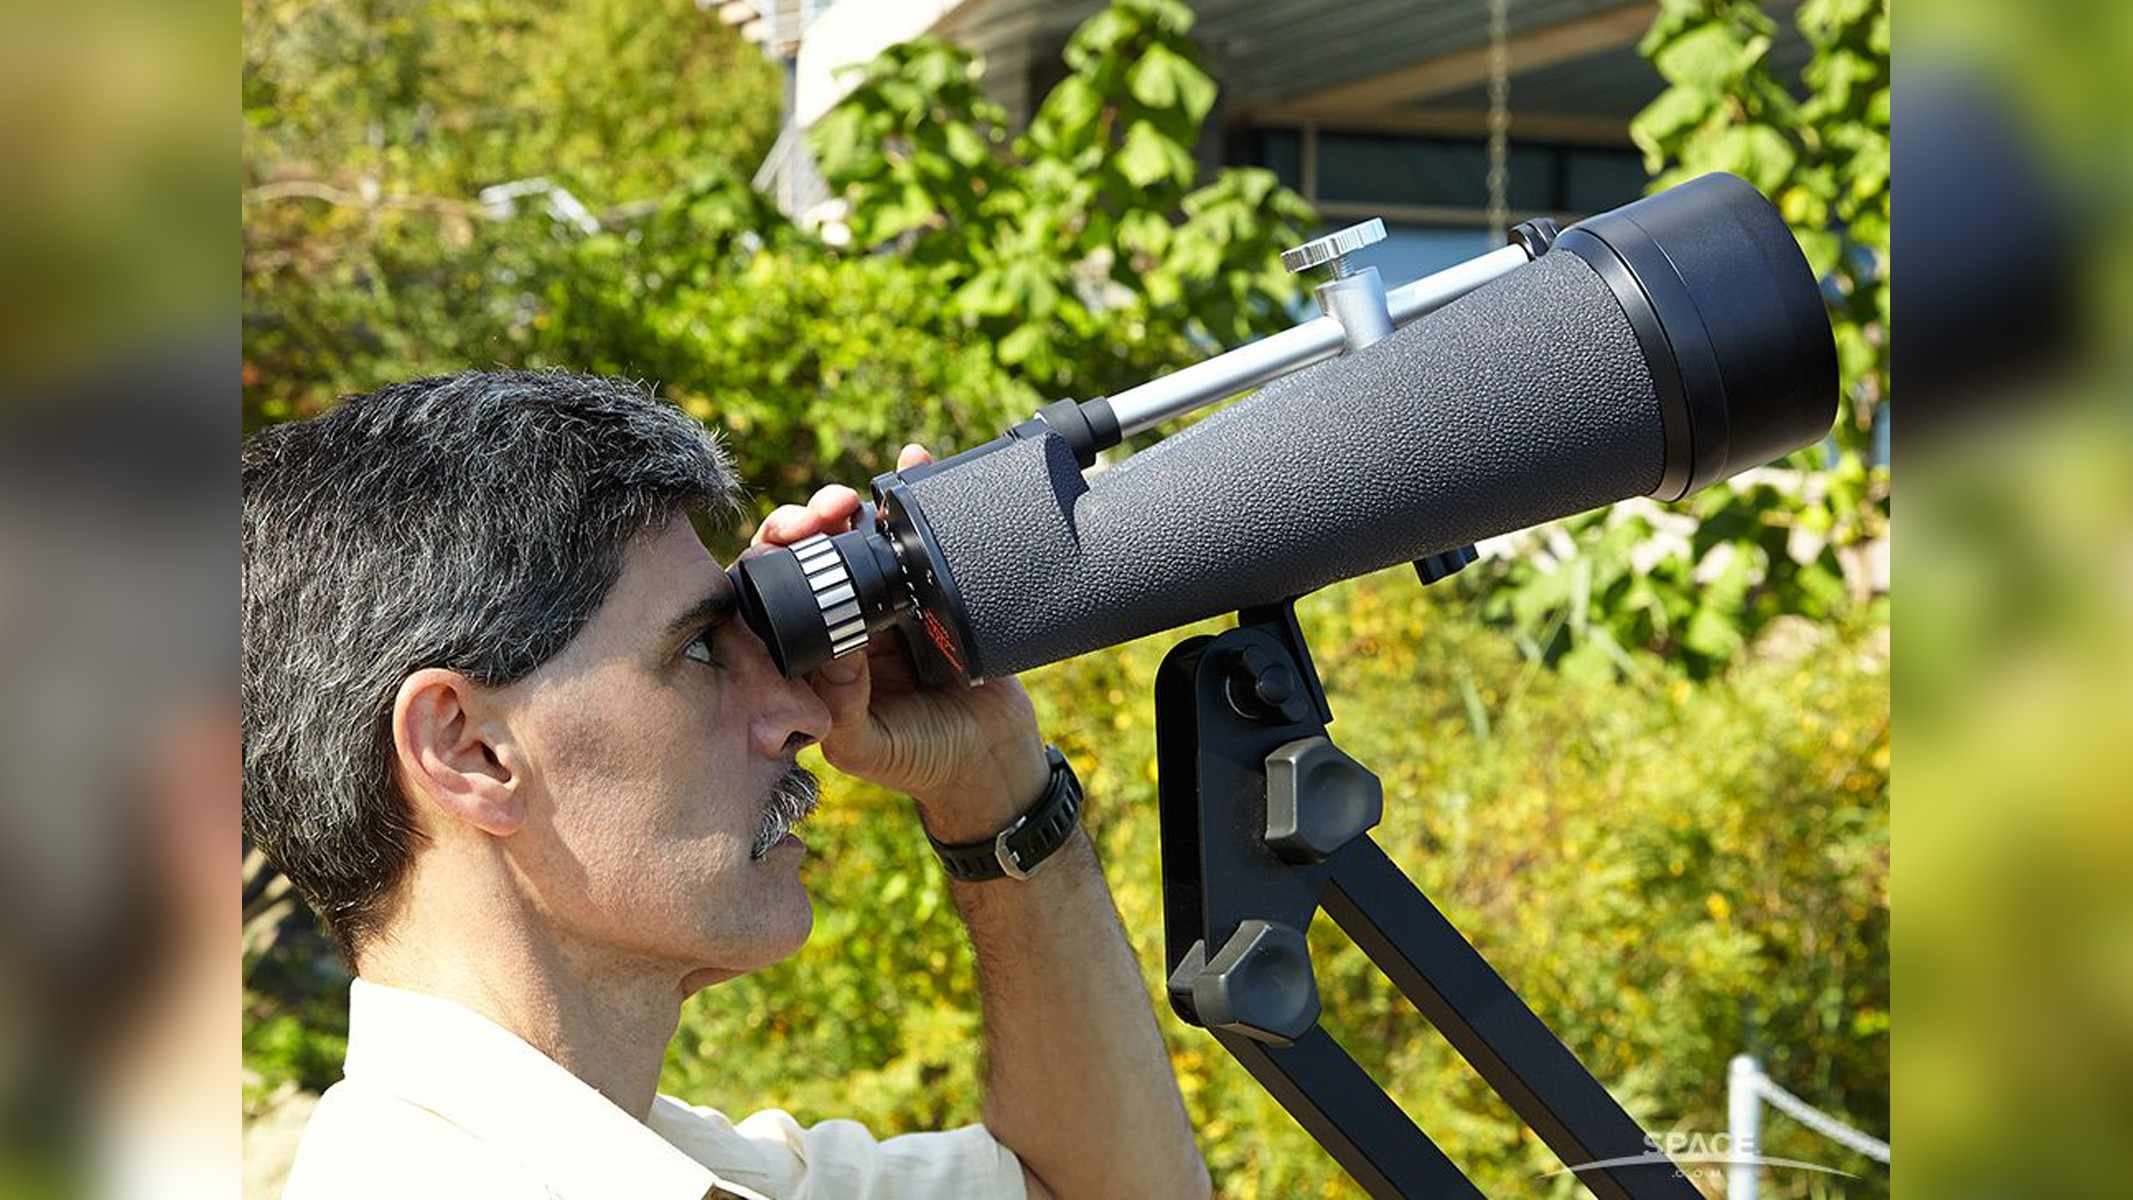 Celestron Skymaster 25x100 binoculars in use with author looking through them at the moon